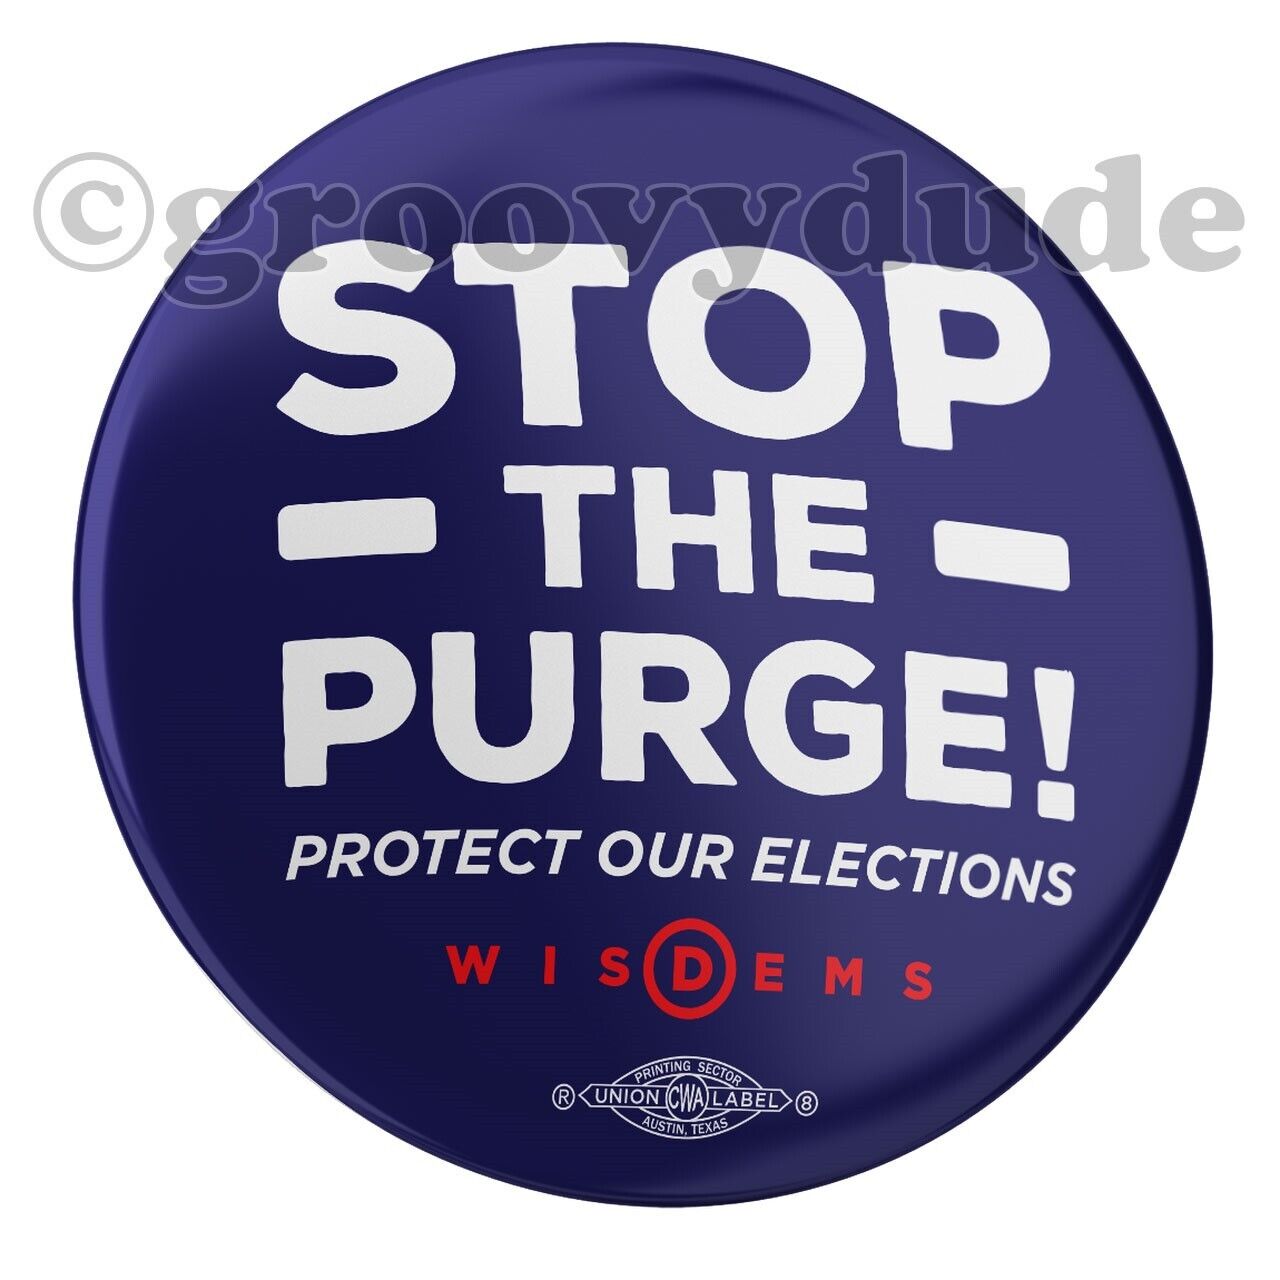 Official WI Dems Stop The Purge Protect Elections Campaign Pin Pinback Button